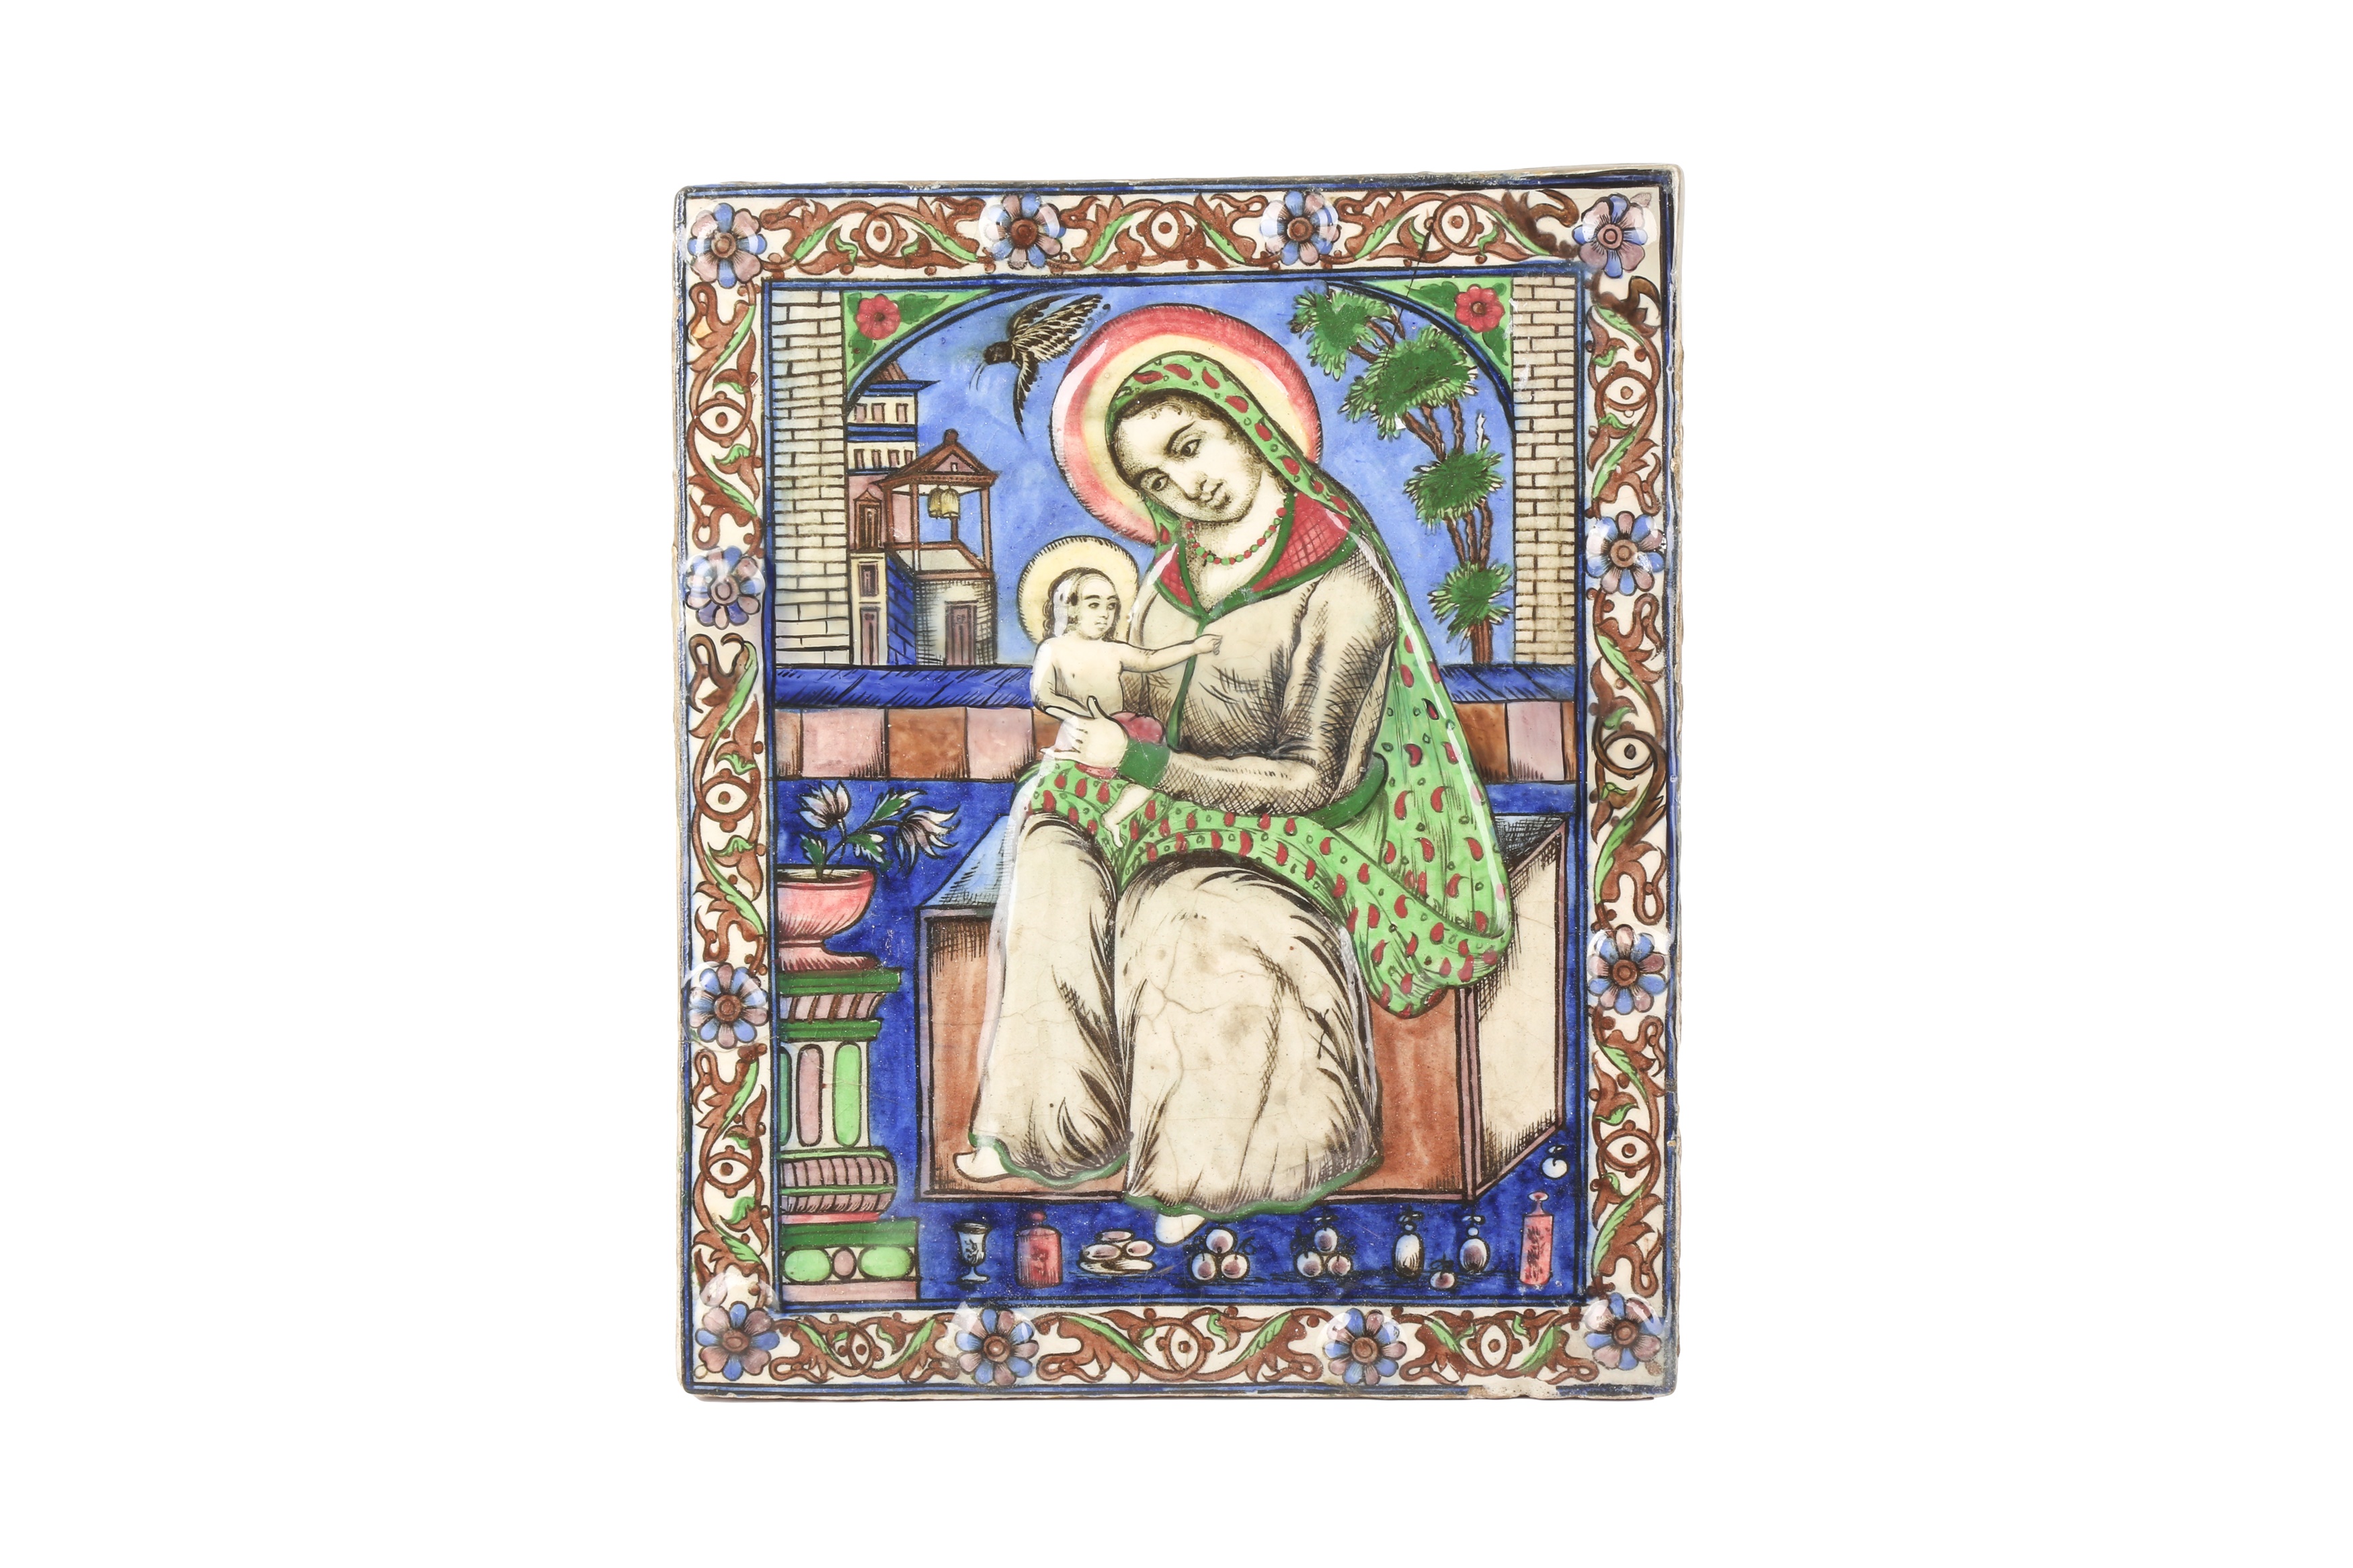 A LARGE 19TH CENTURY MOULDED PERSIAN QAJAR TILE DEPICTING MARY AND BABY JESUS